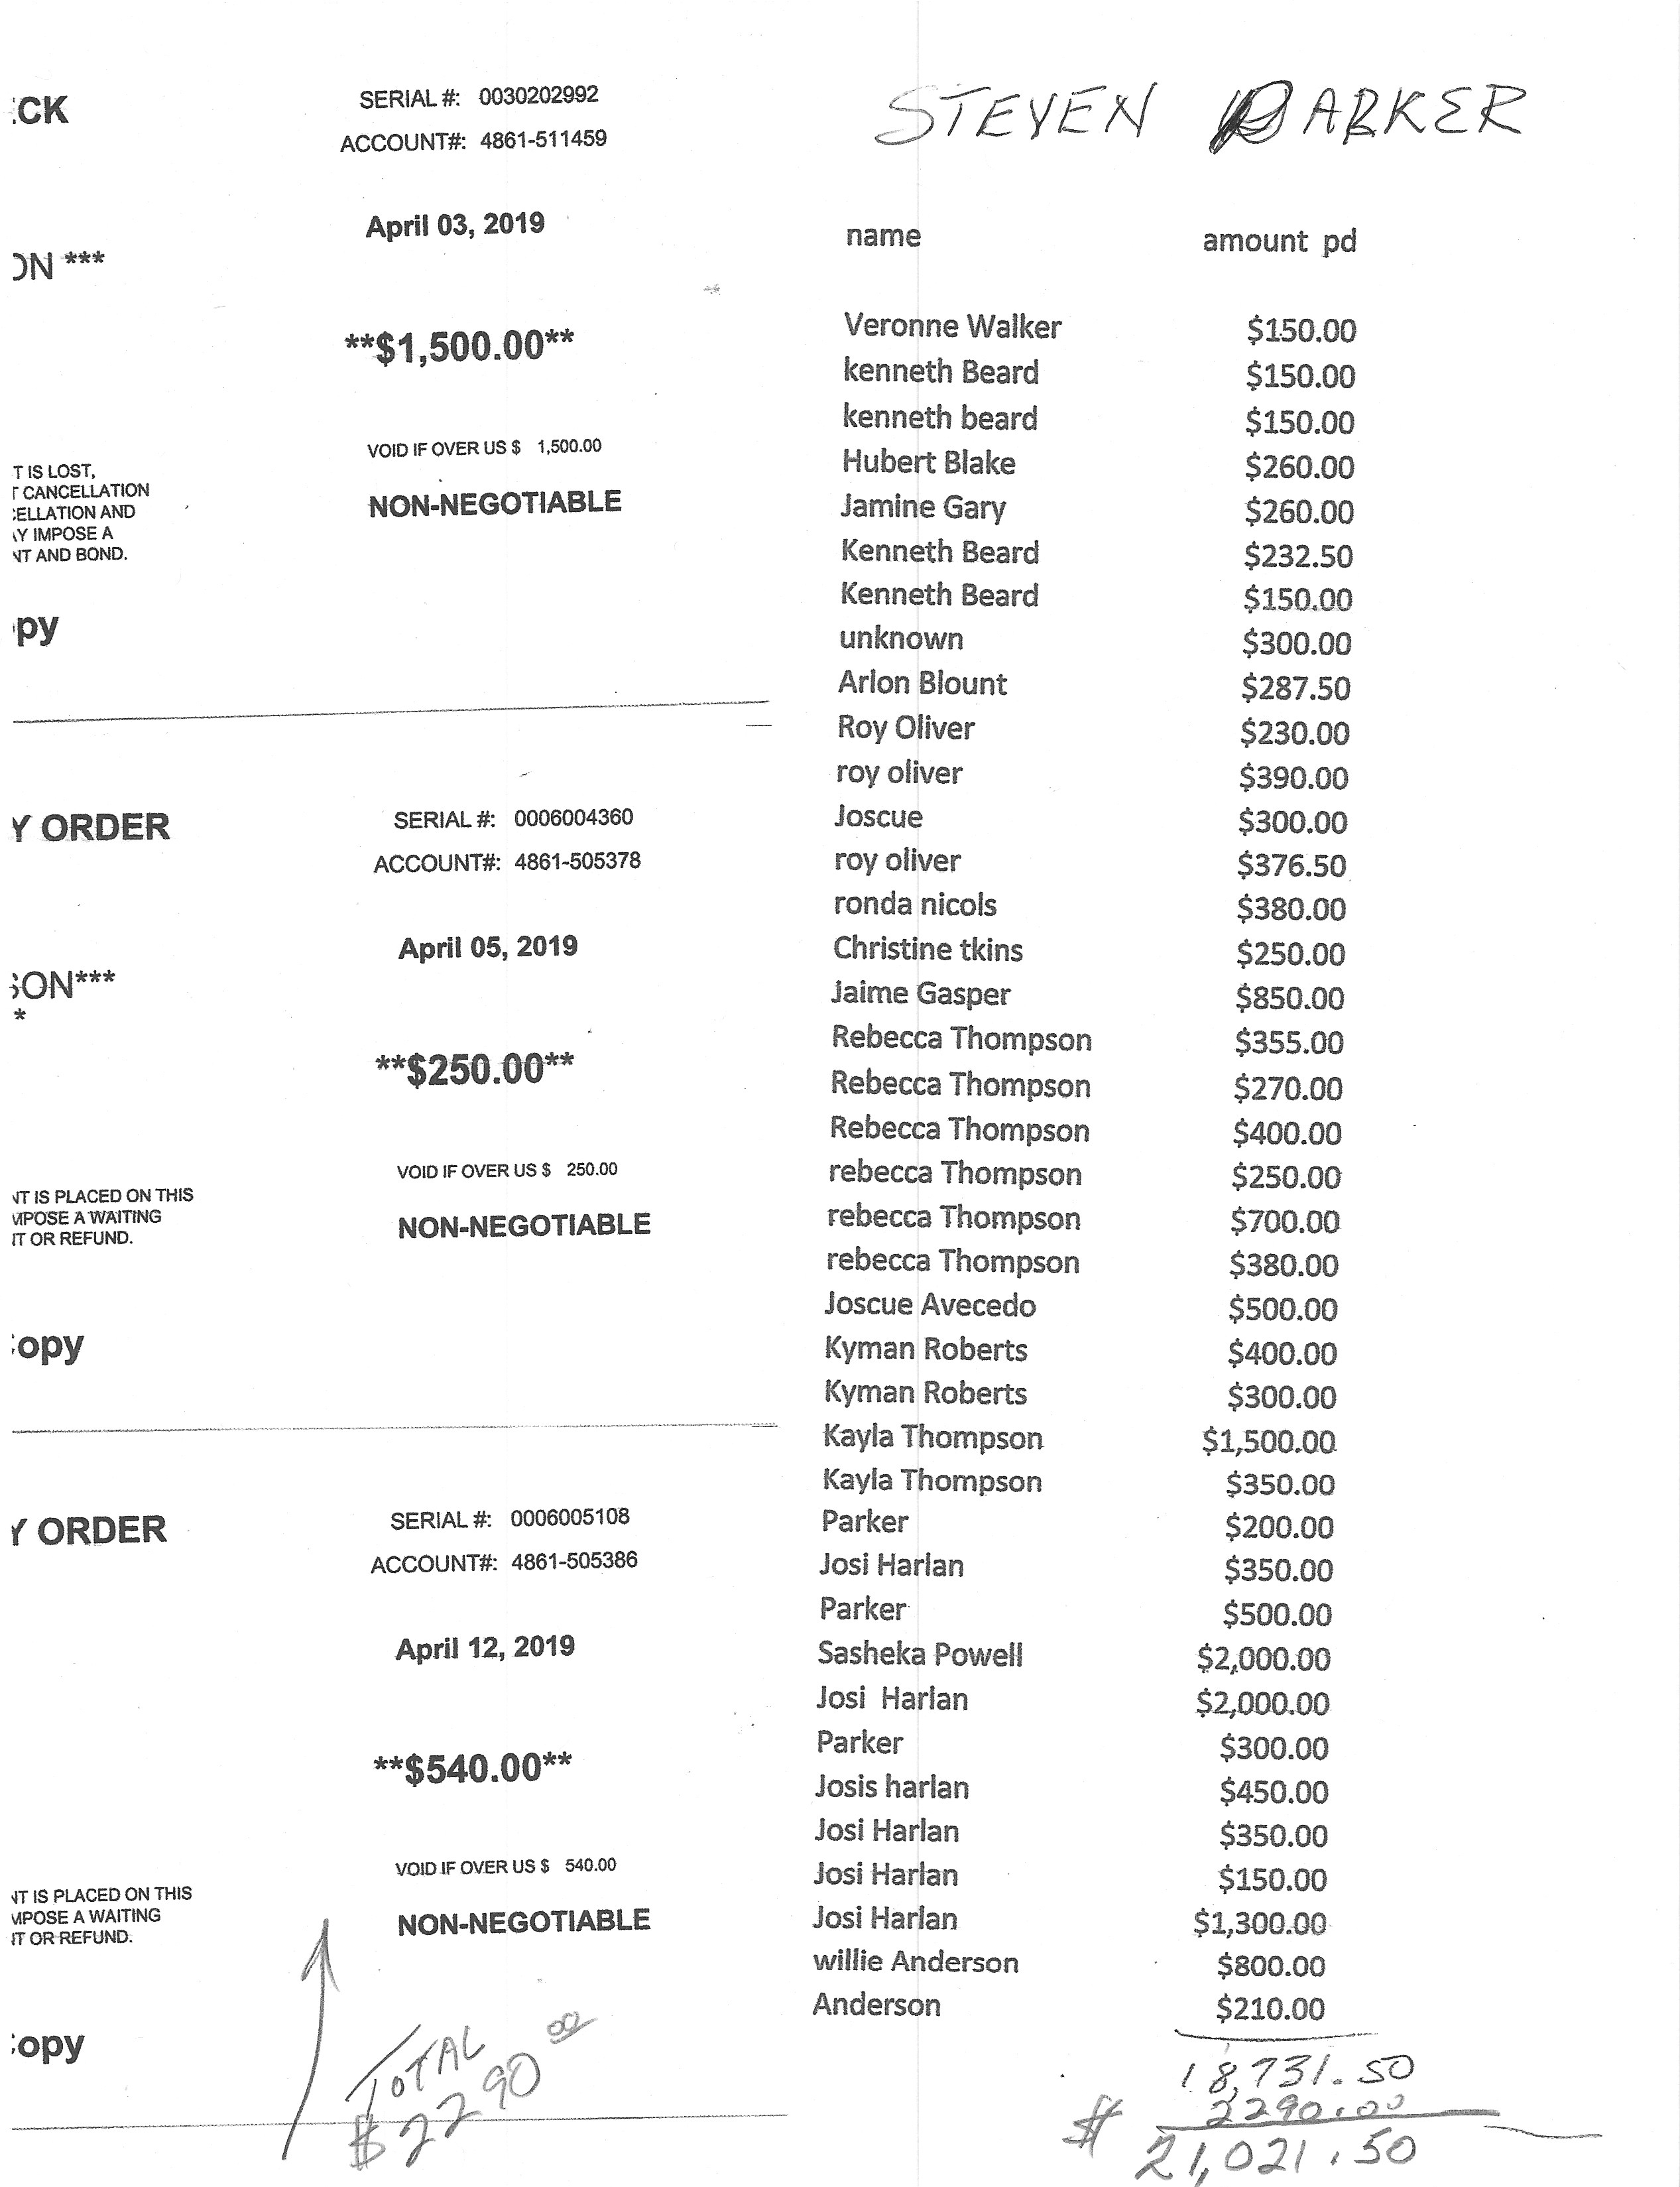 List of recipients steven parker had me pay to